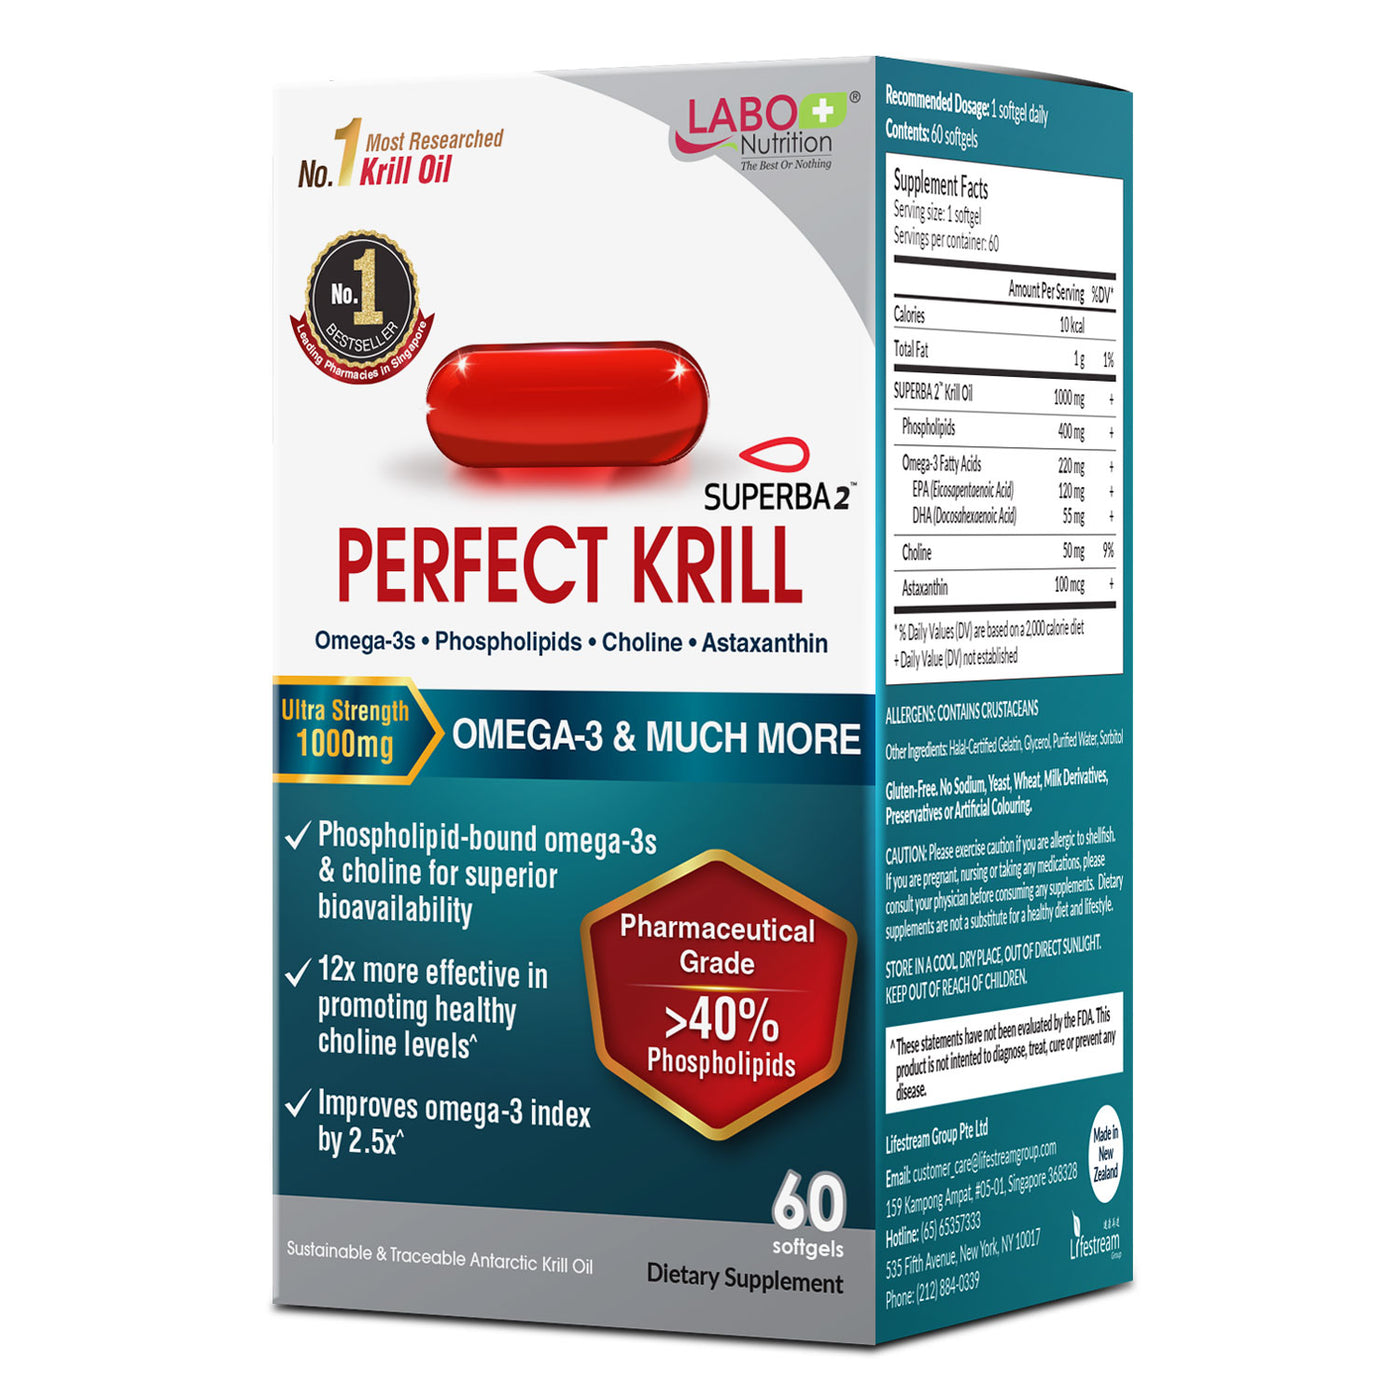 LABO Nutrition Perfect Krill 1000 mg, Ultra Strength Antarctic Krill Oil with Omega-3s, Phospholipids, & Astaxanthin, Heart, Joint, Brain Support - Lifestream Group US